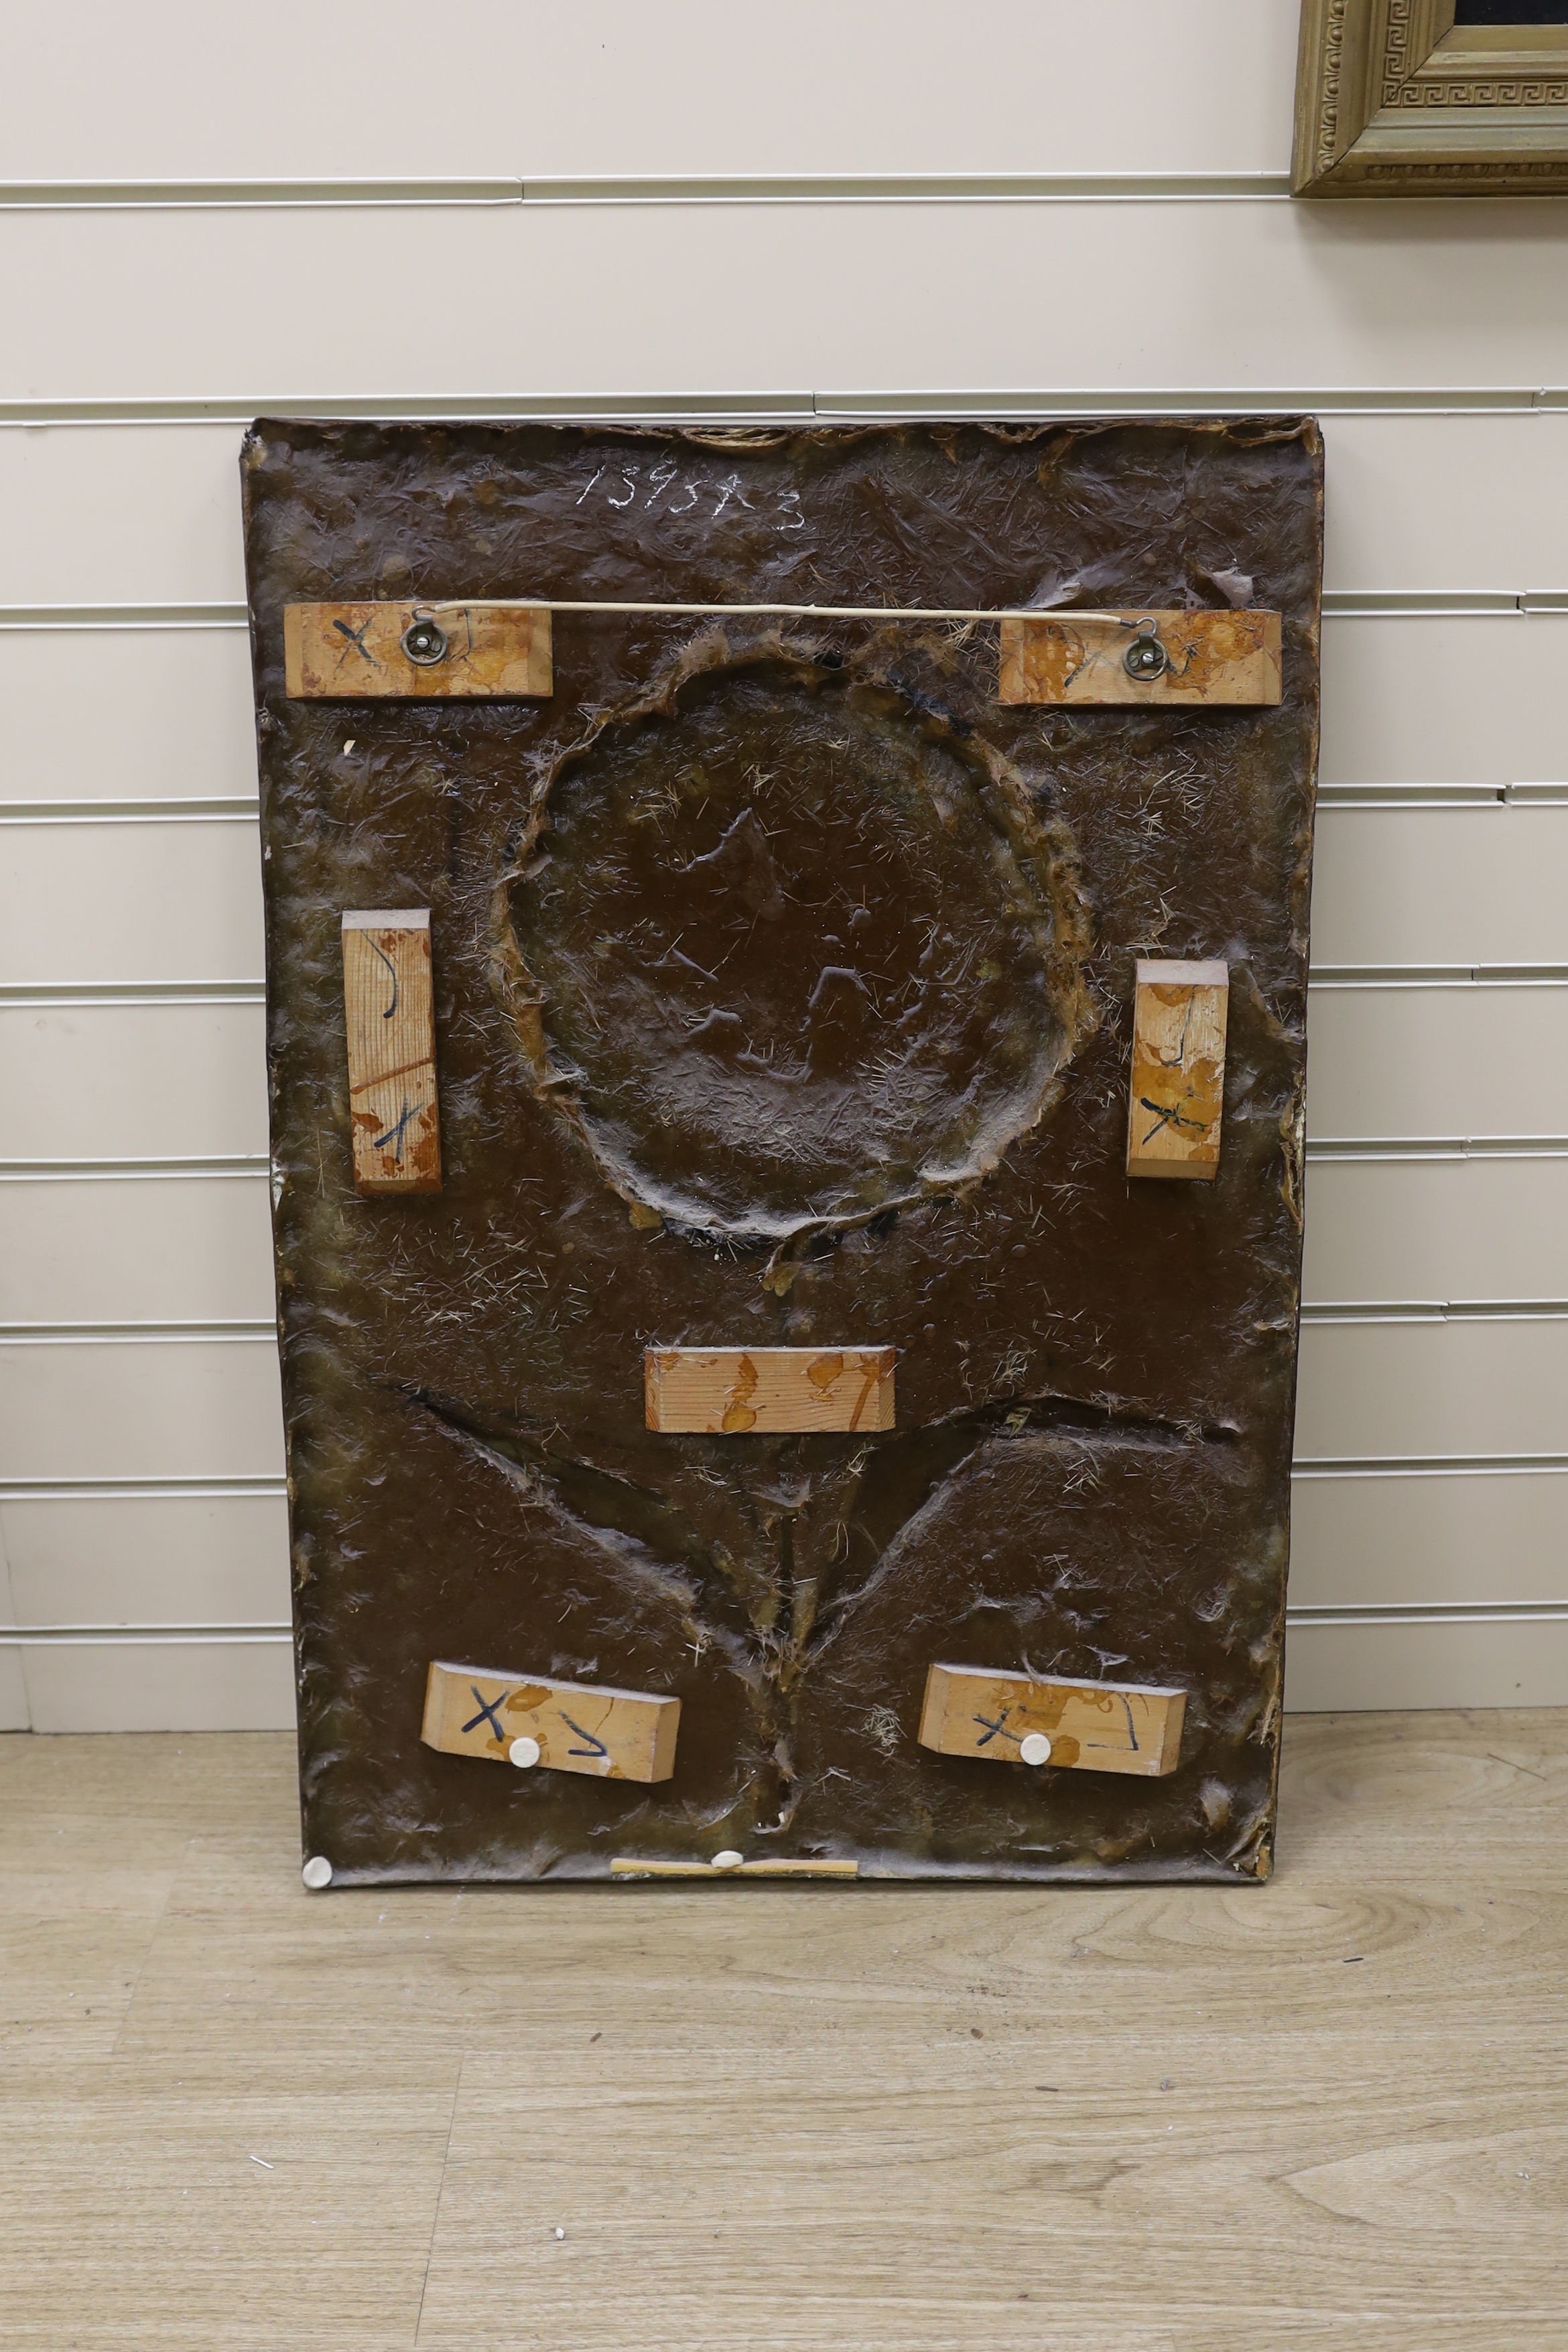 Giovanni Schoeman (1940-1981), bronze plaque, Abstract sunflower, signed, 79 x 54cm